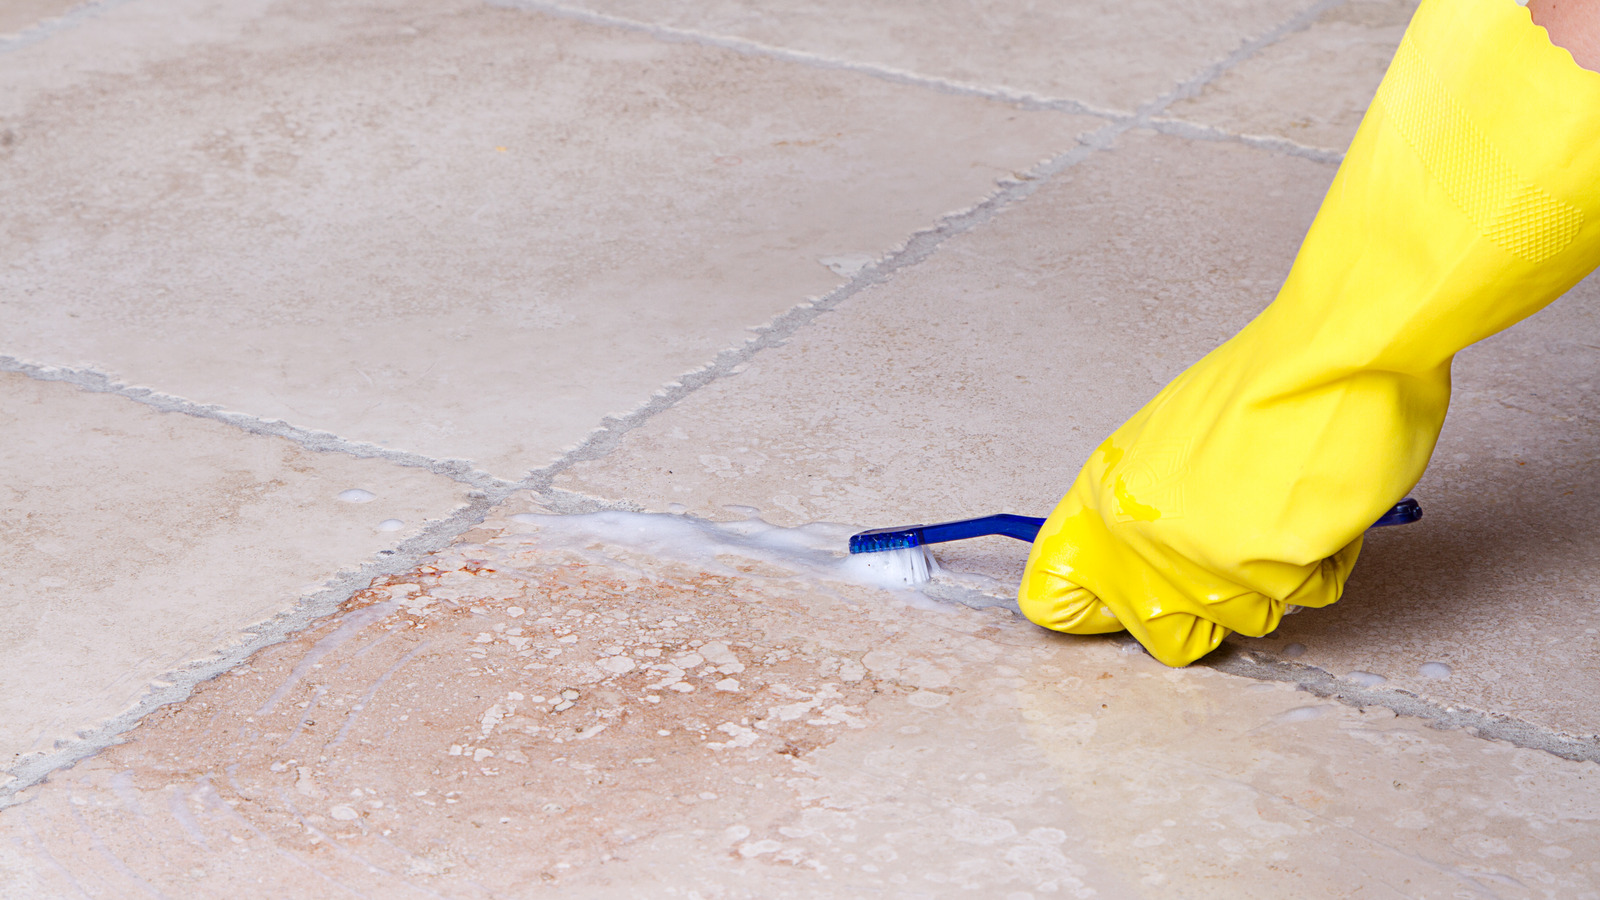 https://www.housedigest.com/img/gallery/this-magical-tiktok-grout-cleaning-hack-just-uses-ingredients-you-already-have-at-home/l-intro-1689358910.jpg